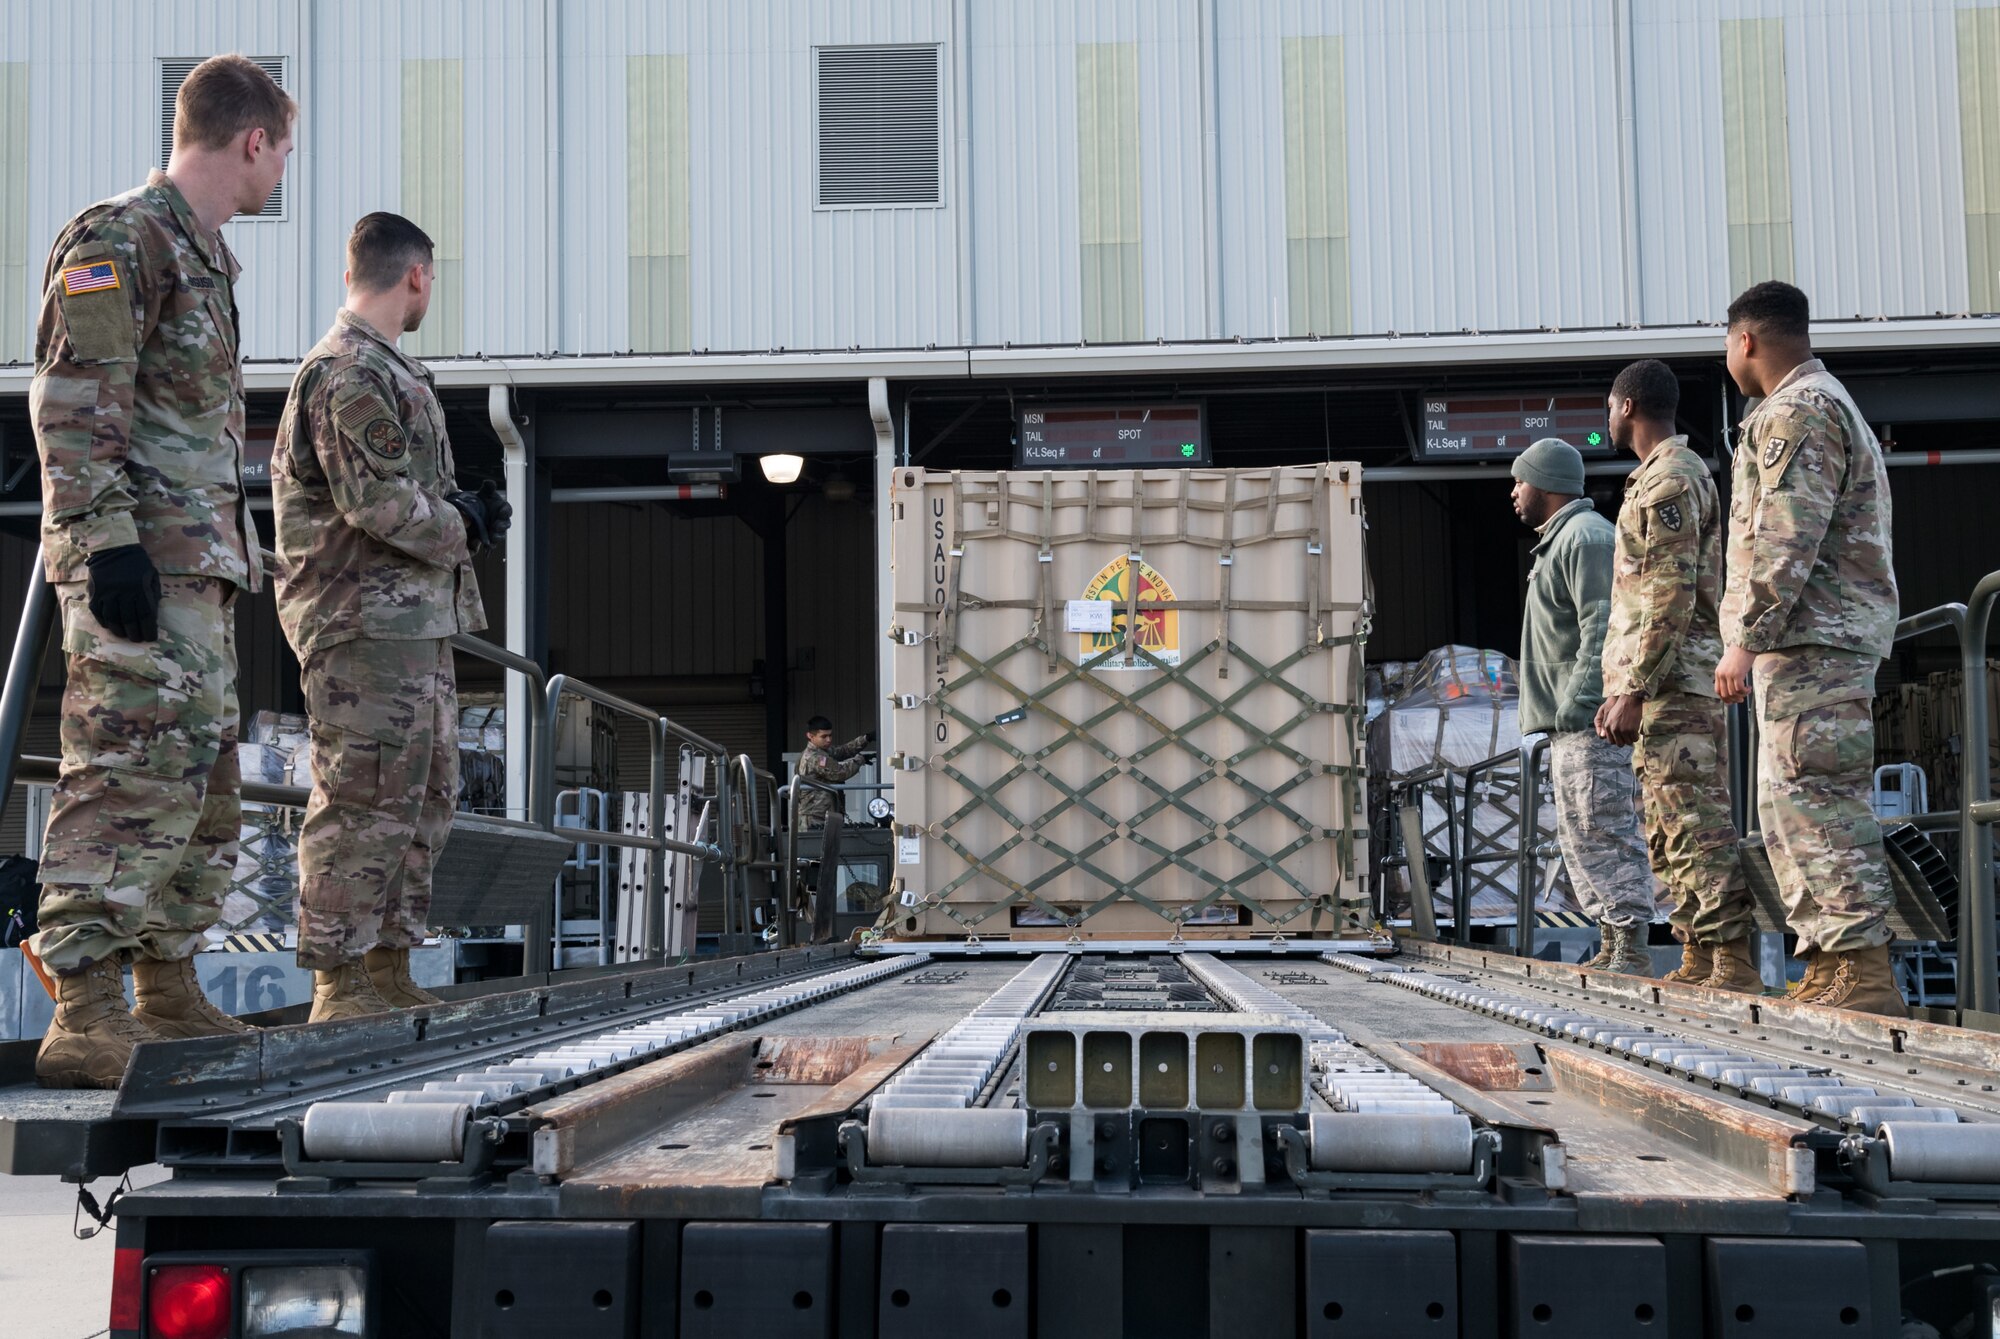 Members of the 436th Aerial Port Squadron, Dover Air Force Base, Del., and Army’s 622nd Movement Control Team, Joint Base Langley-Eustis, Va., observe a pallet being loaded onto a 60-ton K-loader Jan. 10, 2020, on Dover AFB. In a scheduled joint partnership training event, 16 members from the 622nd MCT came to Dover AFB for cargo and personnel processing training. (U.S. Air Force photo by Roland Balik)